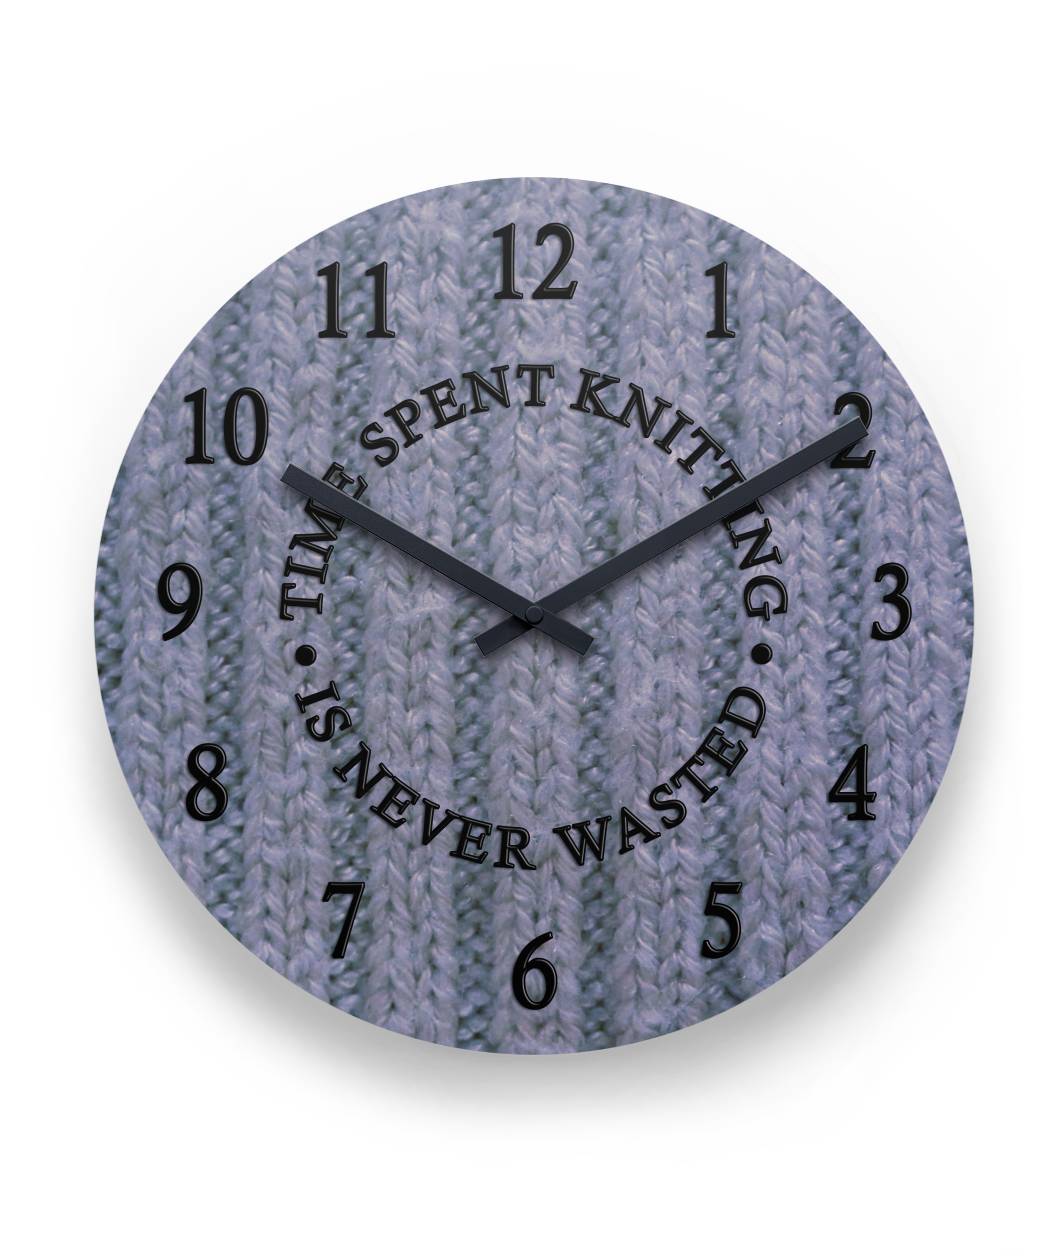 Time Spent Knitting Wall Clock 11" Round Wall Clock